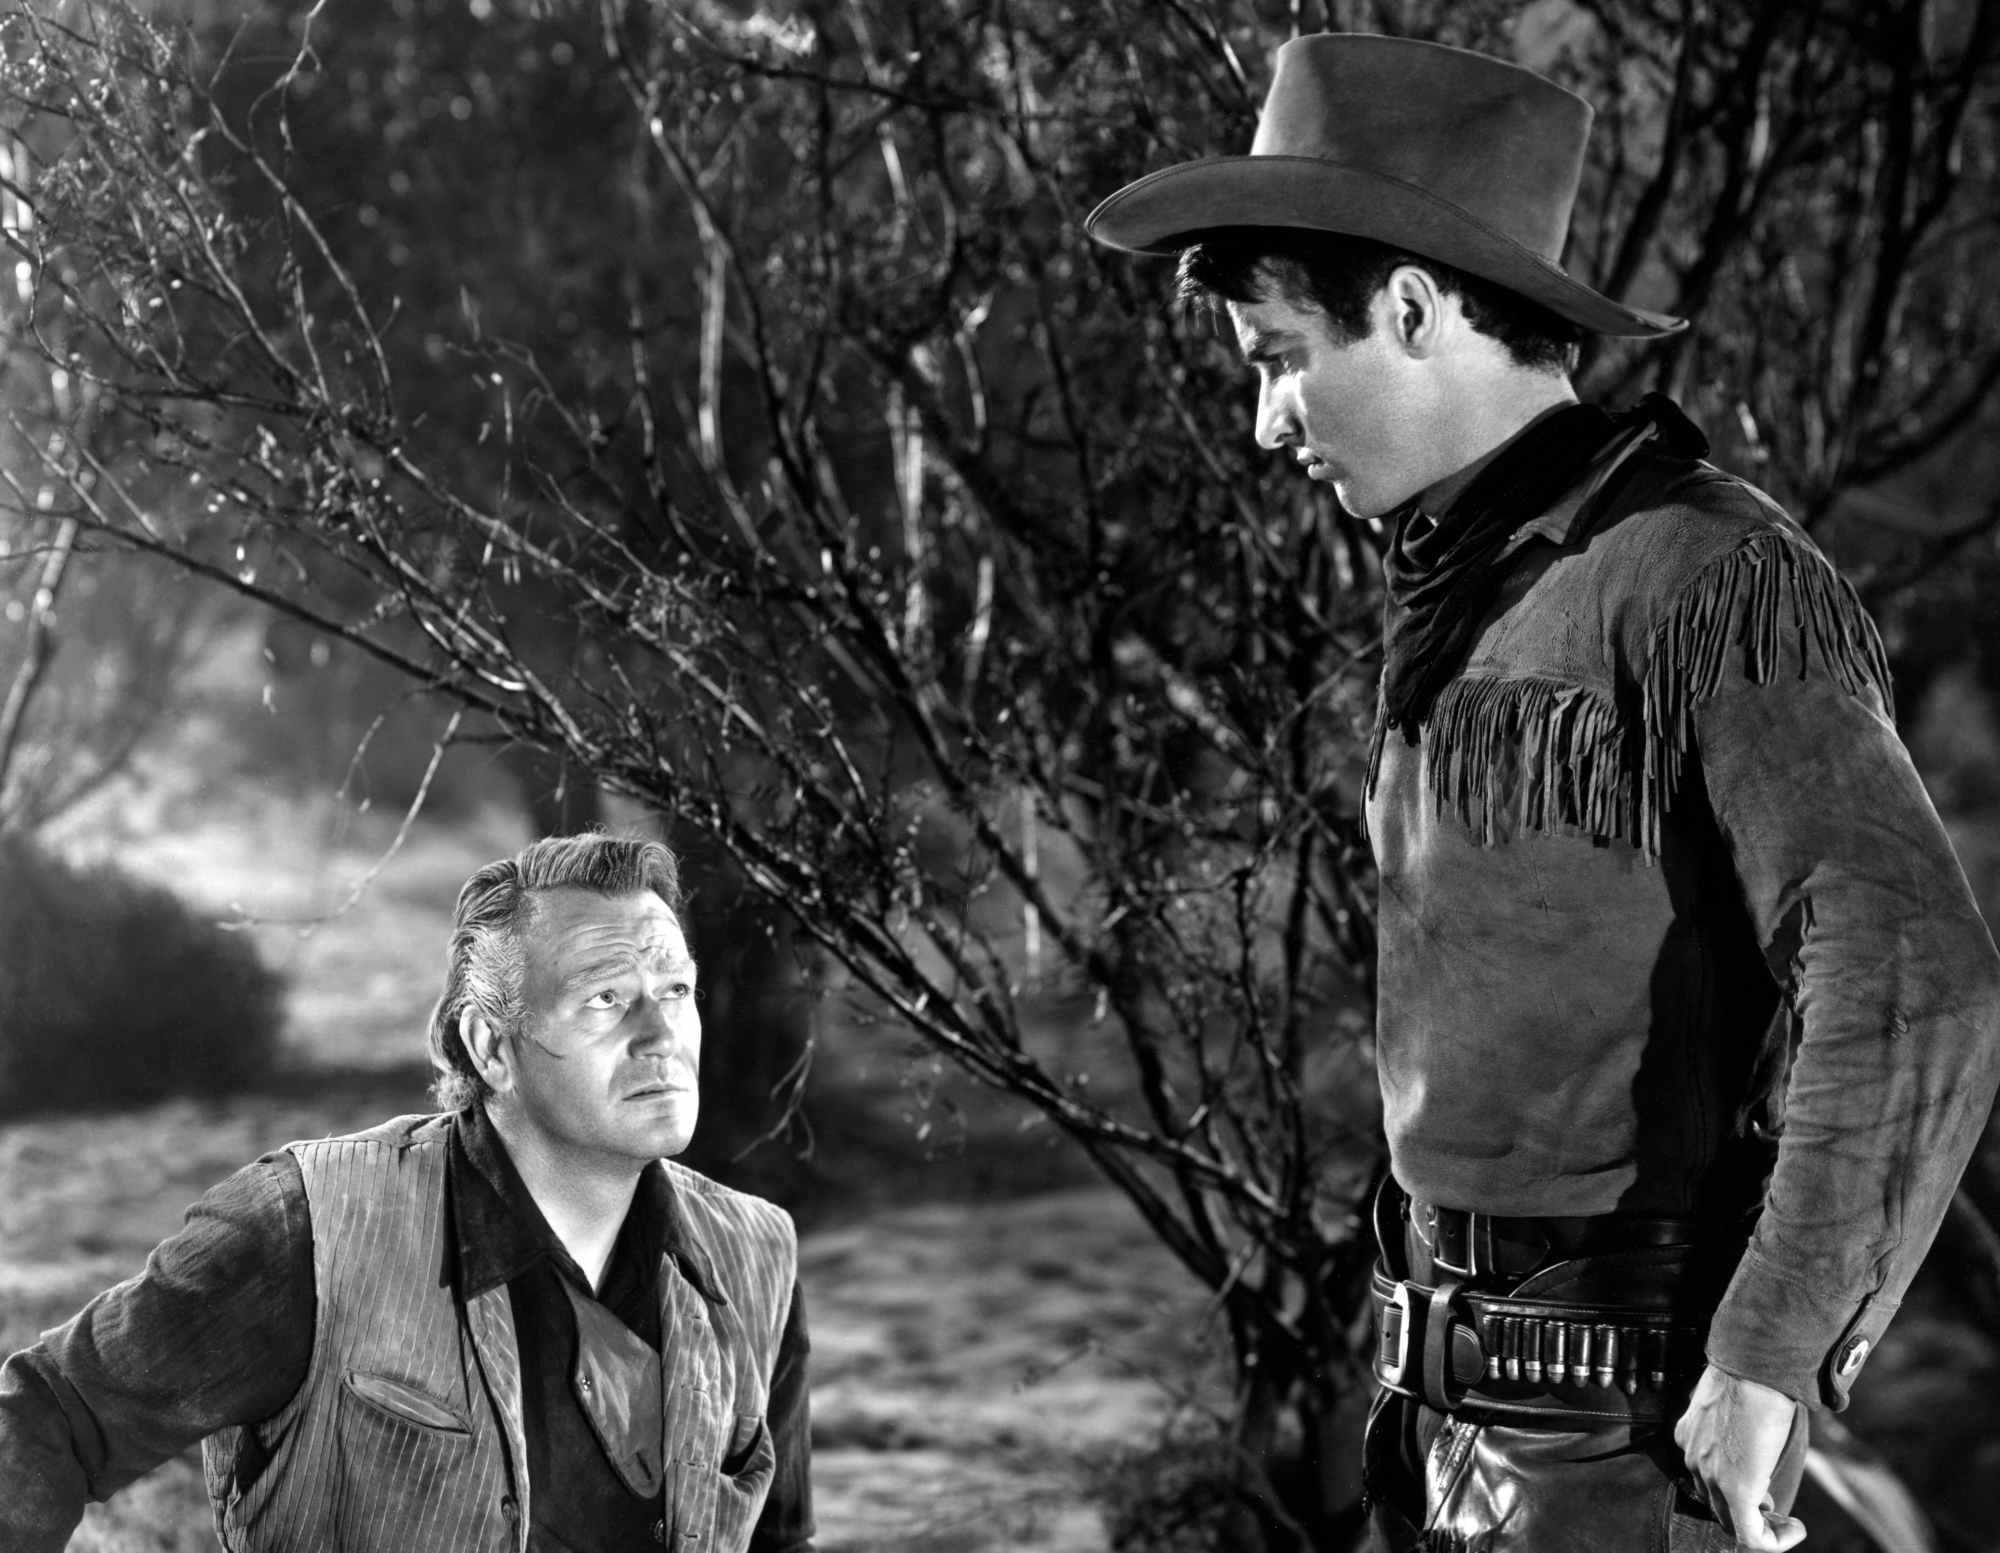 'Red River' John Wayne as Thomas Dunson and Montgomery Clift as Matt Garth looking at each other wearing Western costumes